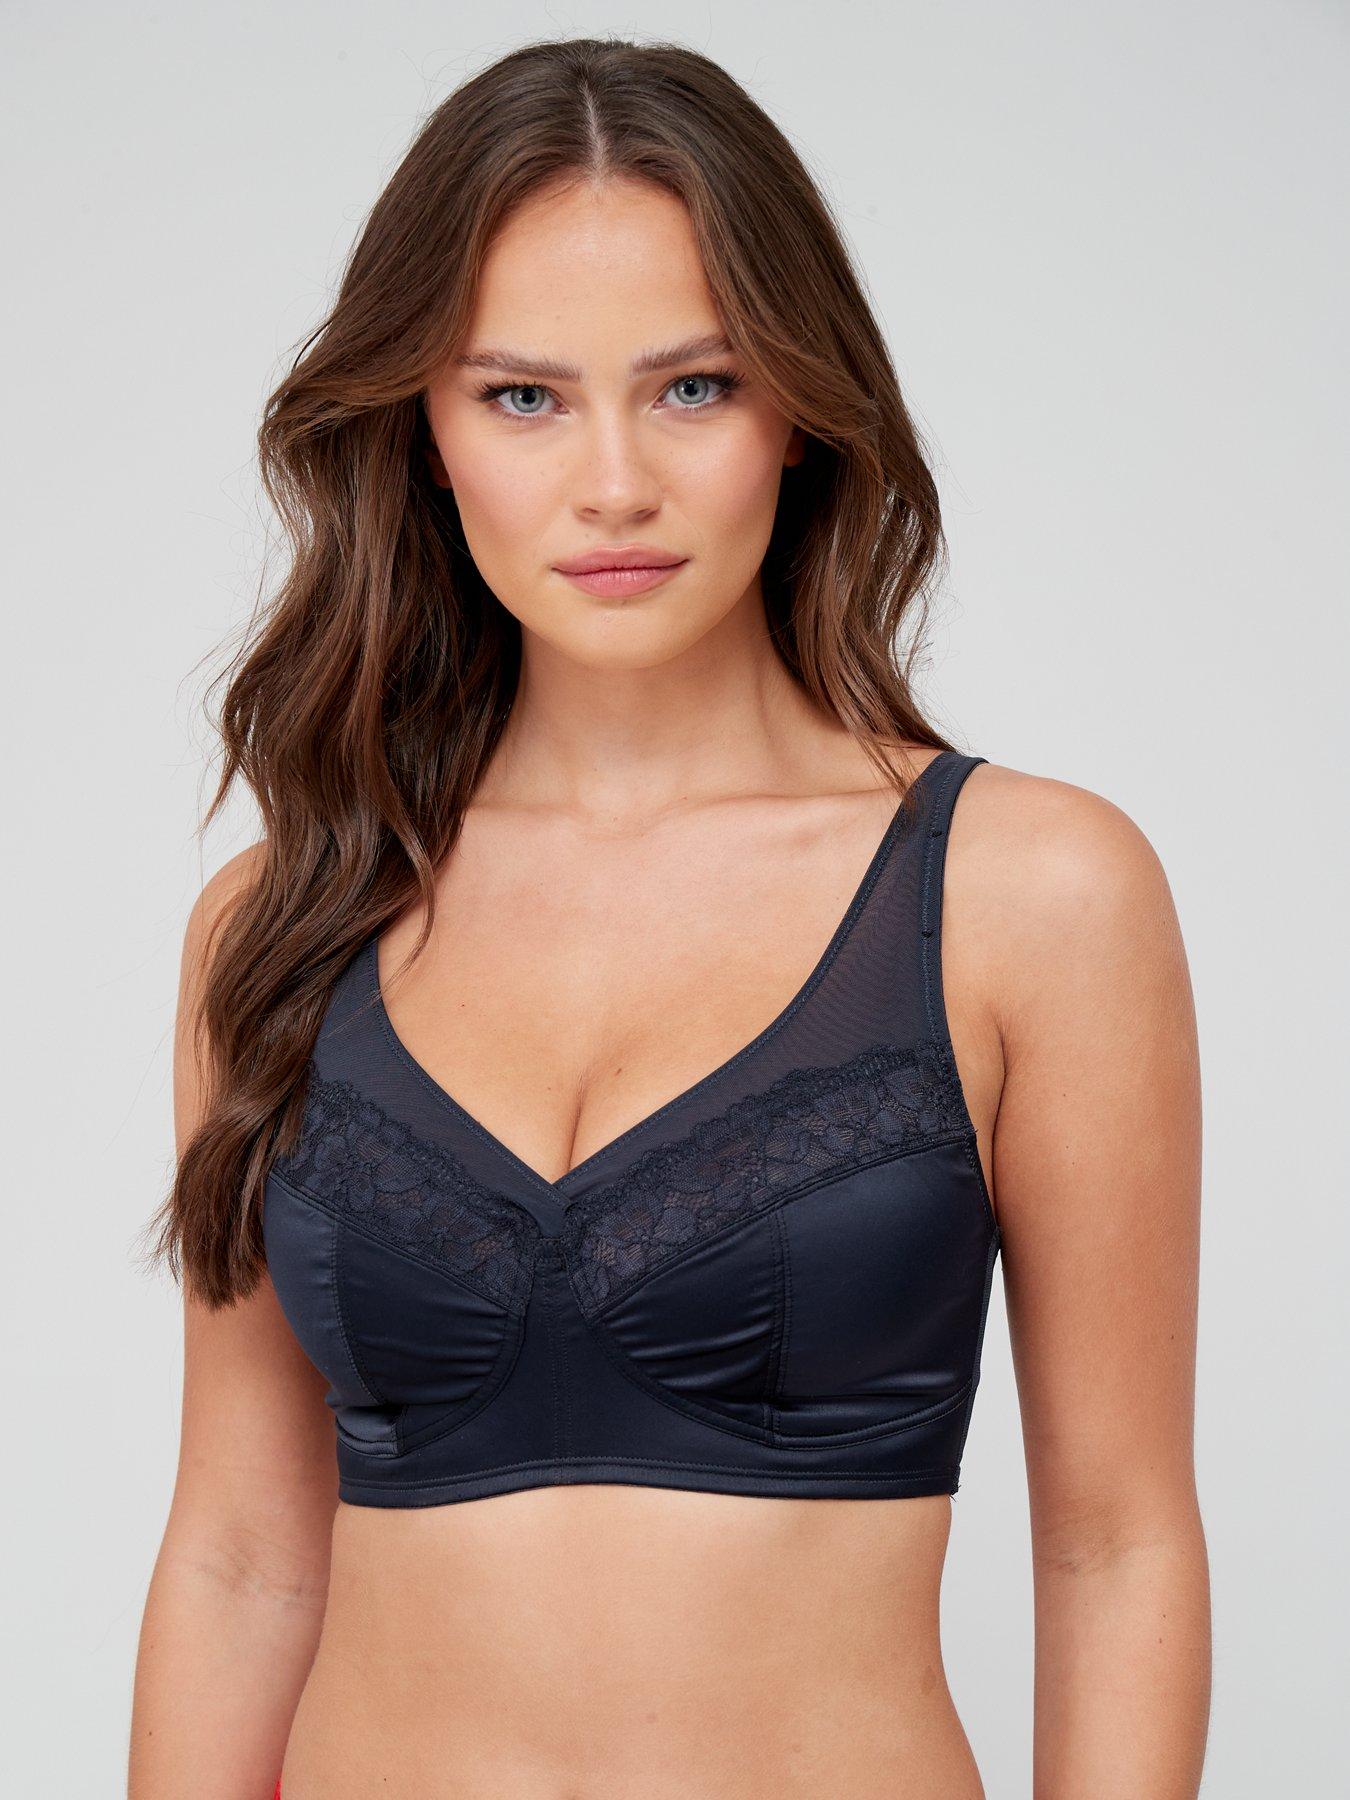 Triumph Doreen N, Firm support, Non wired, Lace, Non Padded, Full Cup Bra,  Black